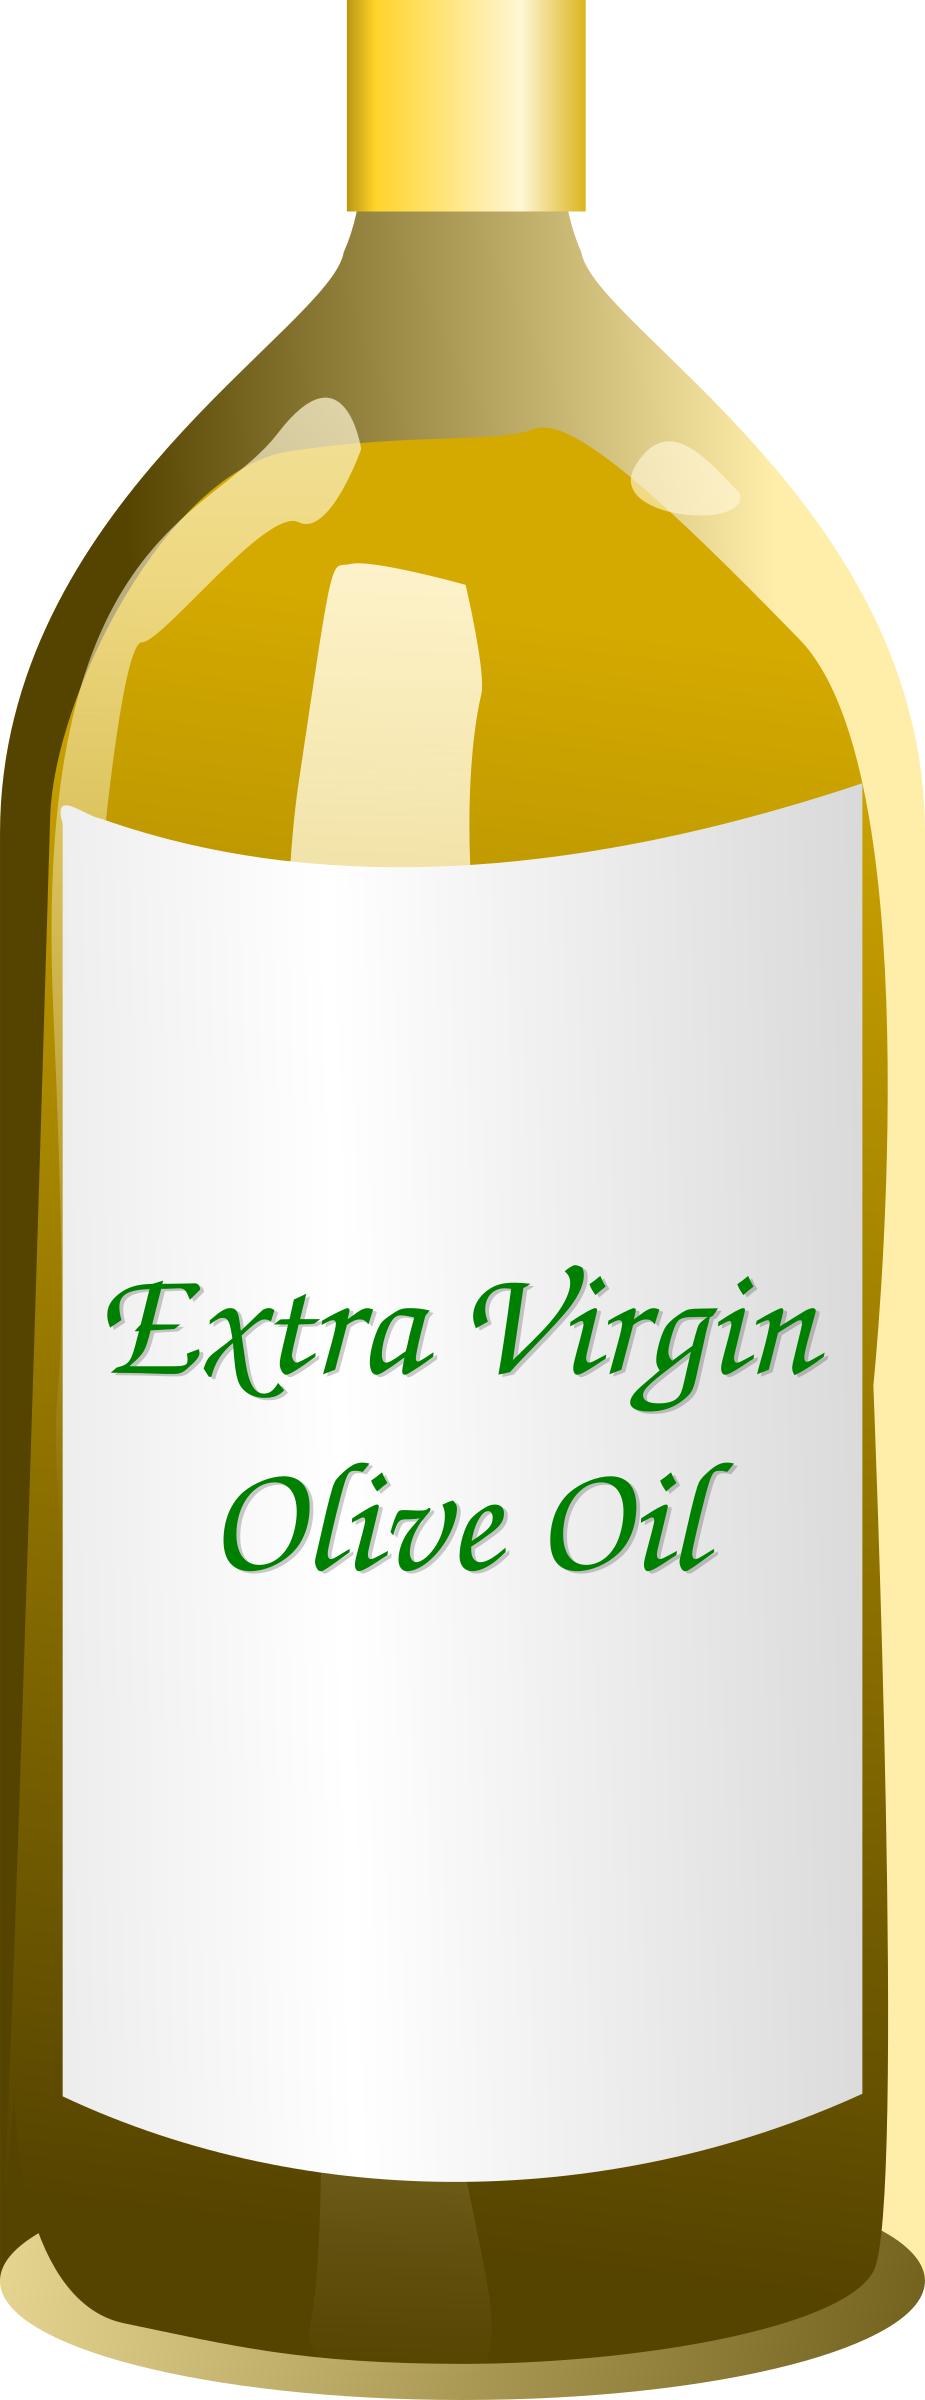 Extra Virgin Olive Oil bottle PNG icons